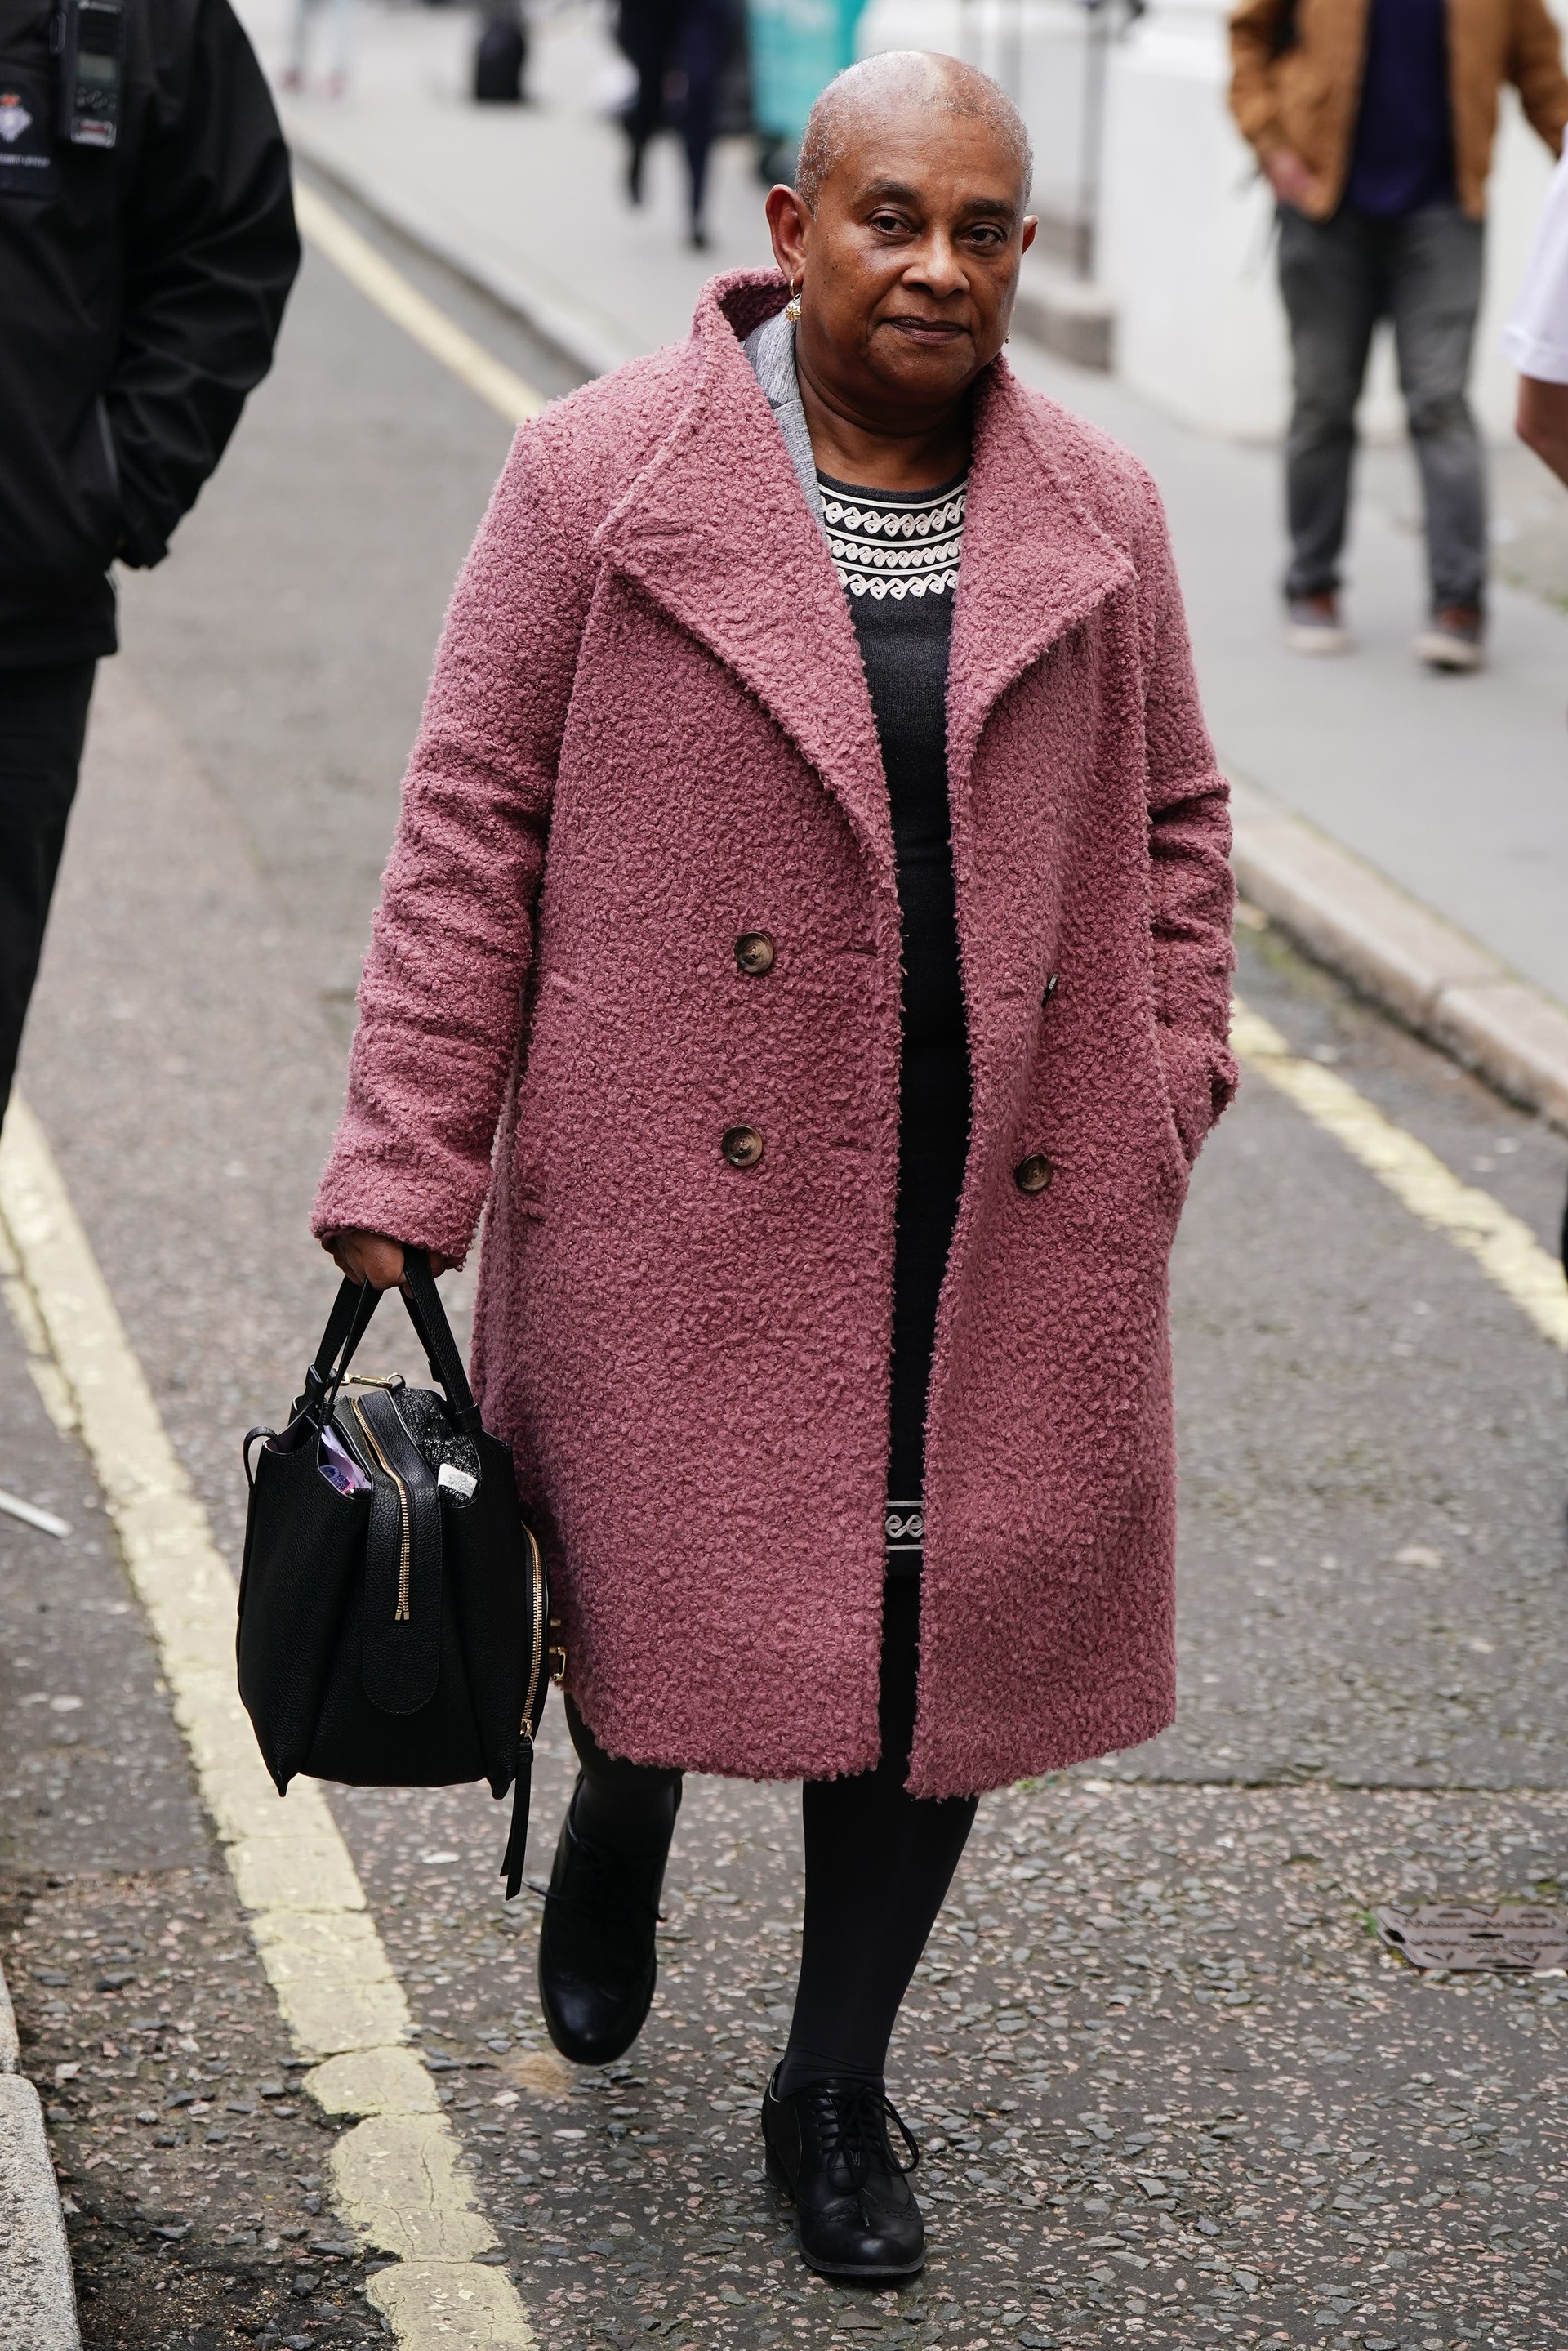 Baroness Doreen Lawrence leaves the Royal Courts Of Justice (Aaron Chown/PA)
